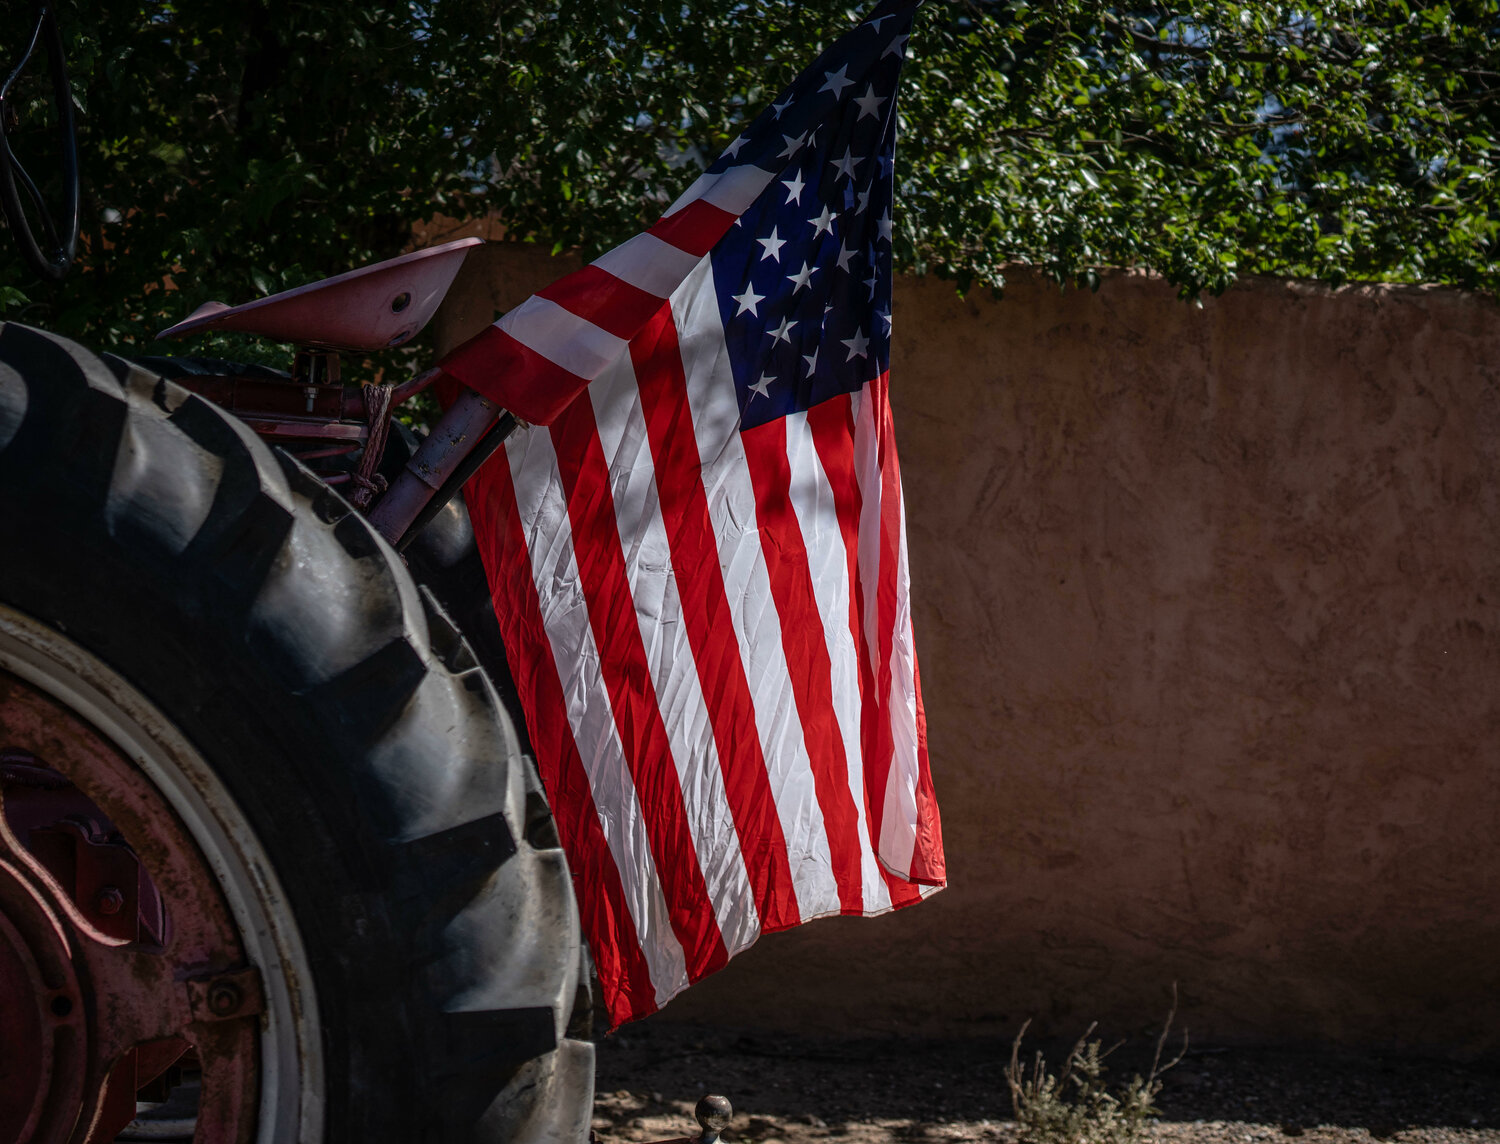 Dozens of tractors from the Corrales Tractor Club await to participate in the village's Fourth of July parade. (Roberto E. Rosales/Corrales Comment)